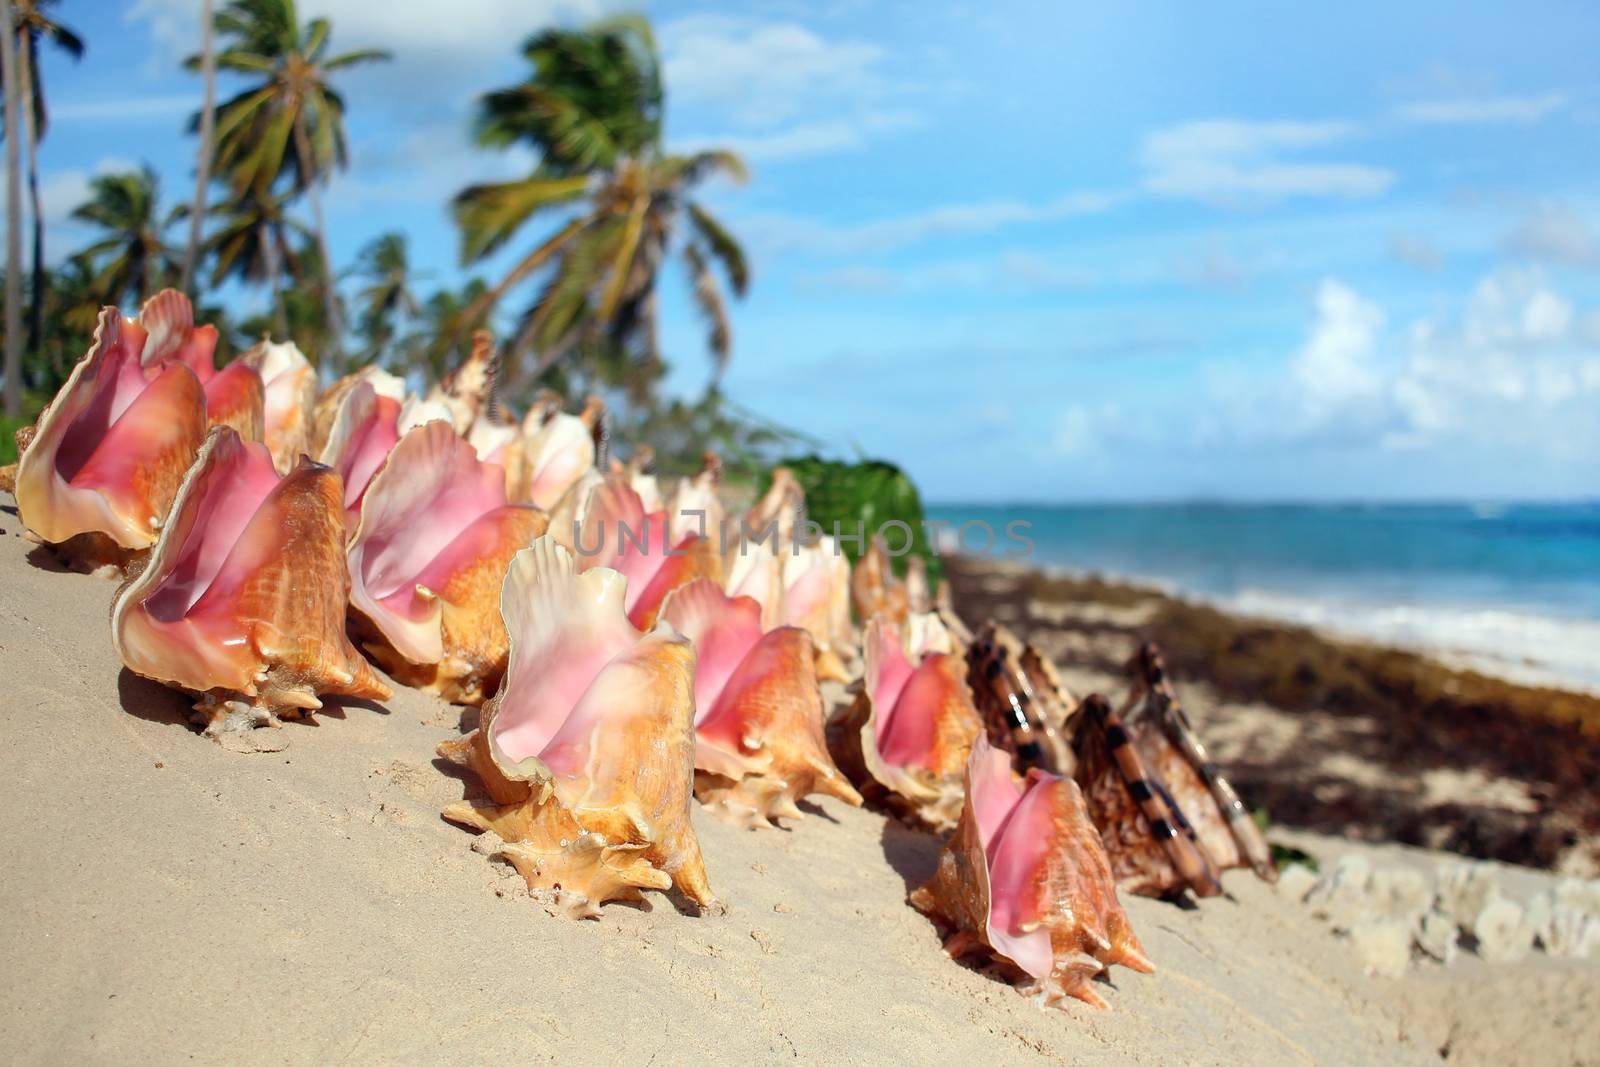 Seashells on the beach by ziss